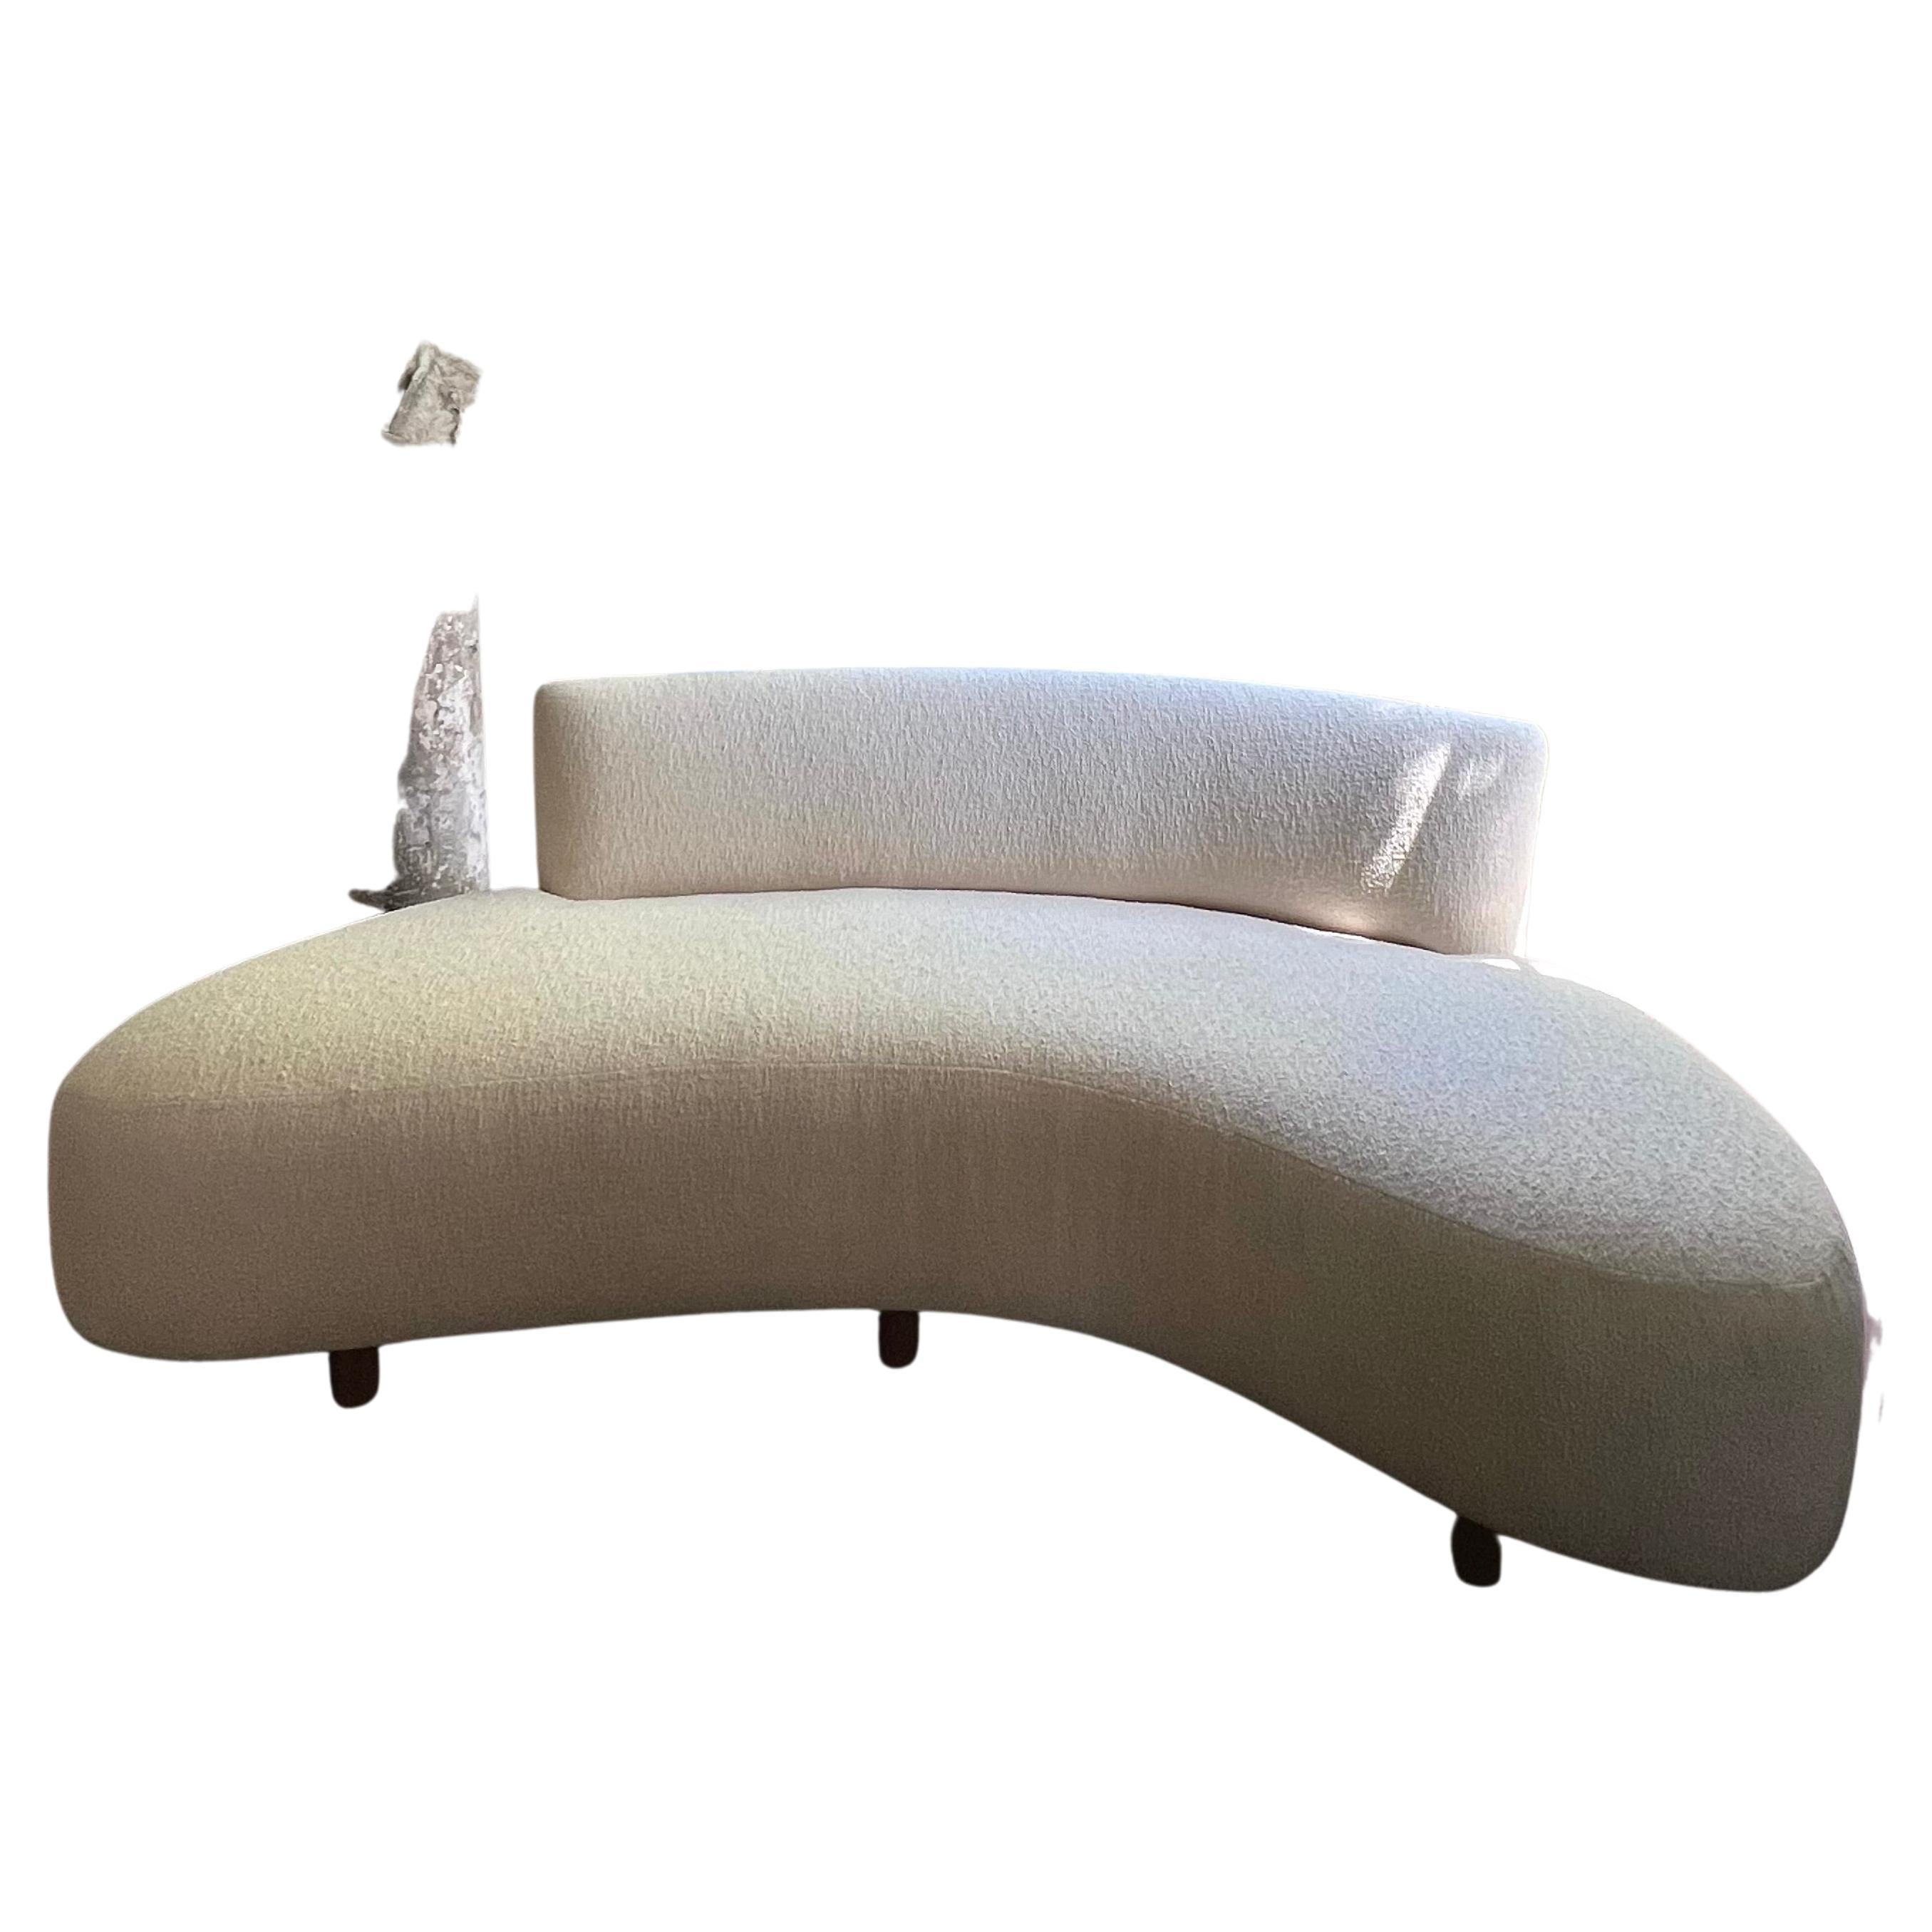 Curved Serpentine-inspired sofa with new creamy boucle upholstery.